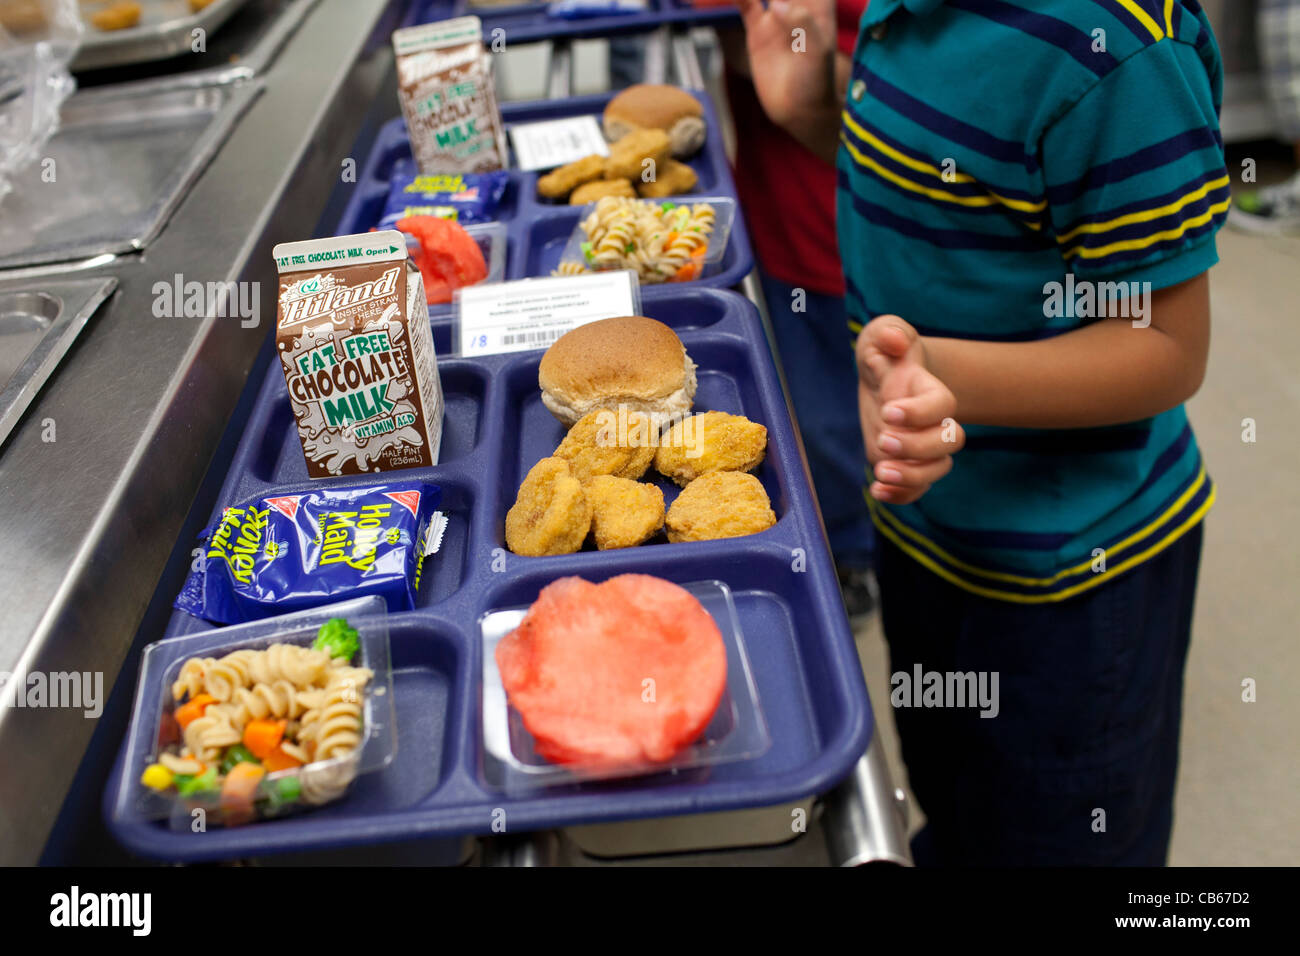 A student makes a selection in an elementary school lunch line. Stock Photo